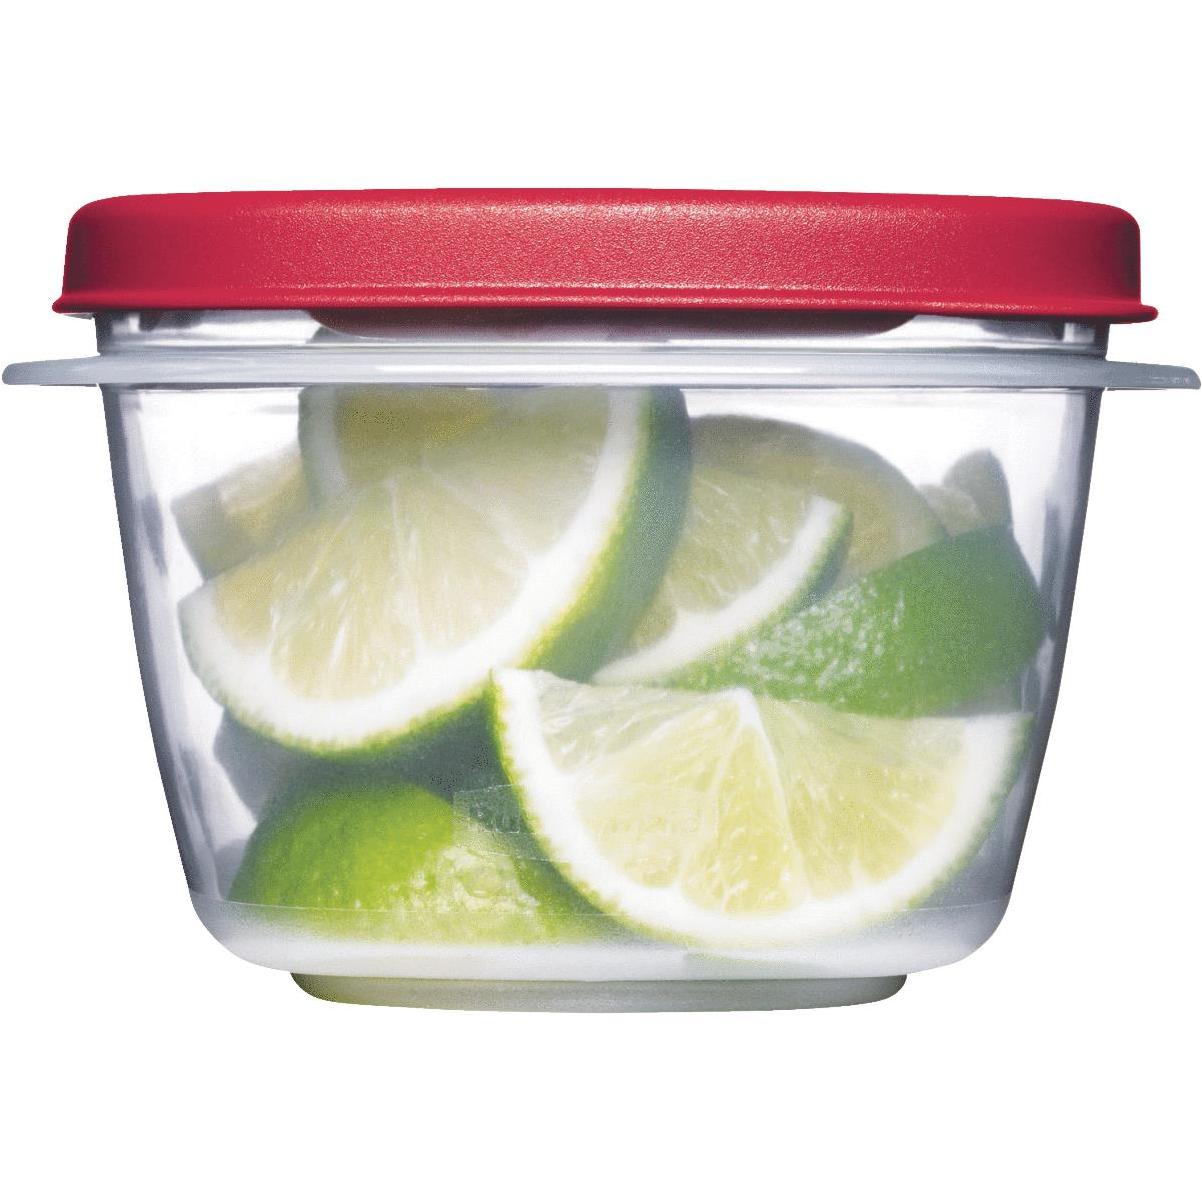 Rubbermaid Easy Find Lids 3 C. Clear Round Food Storage Container